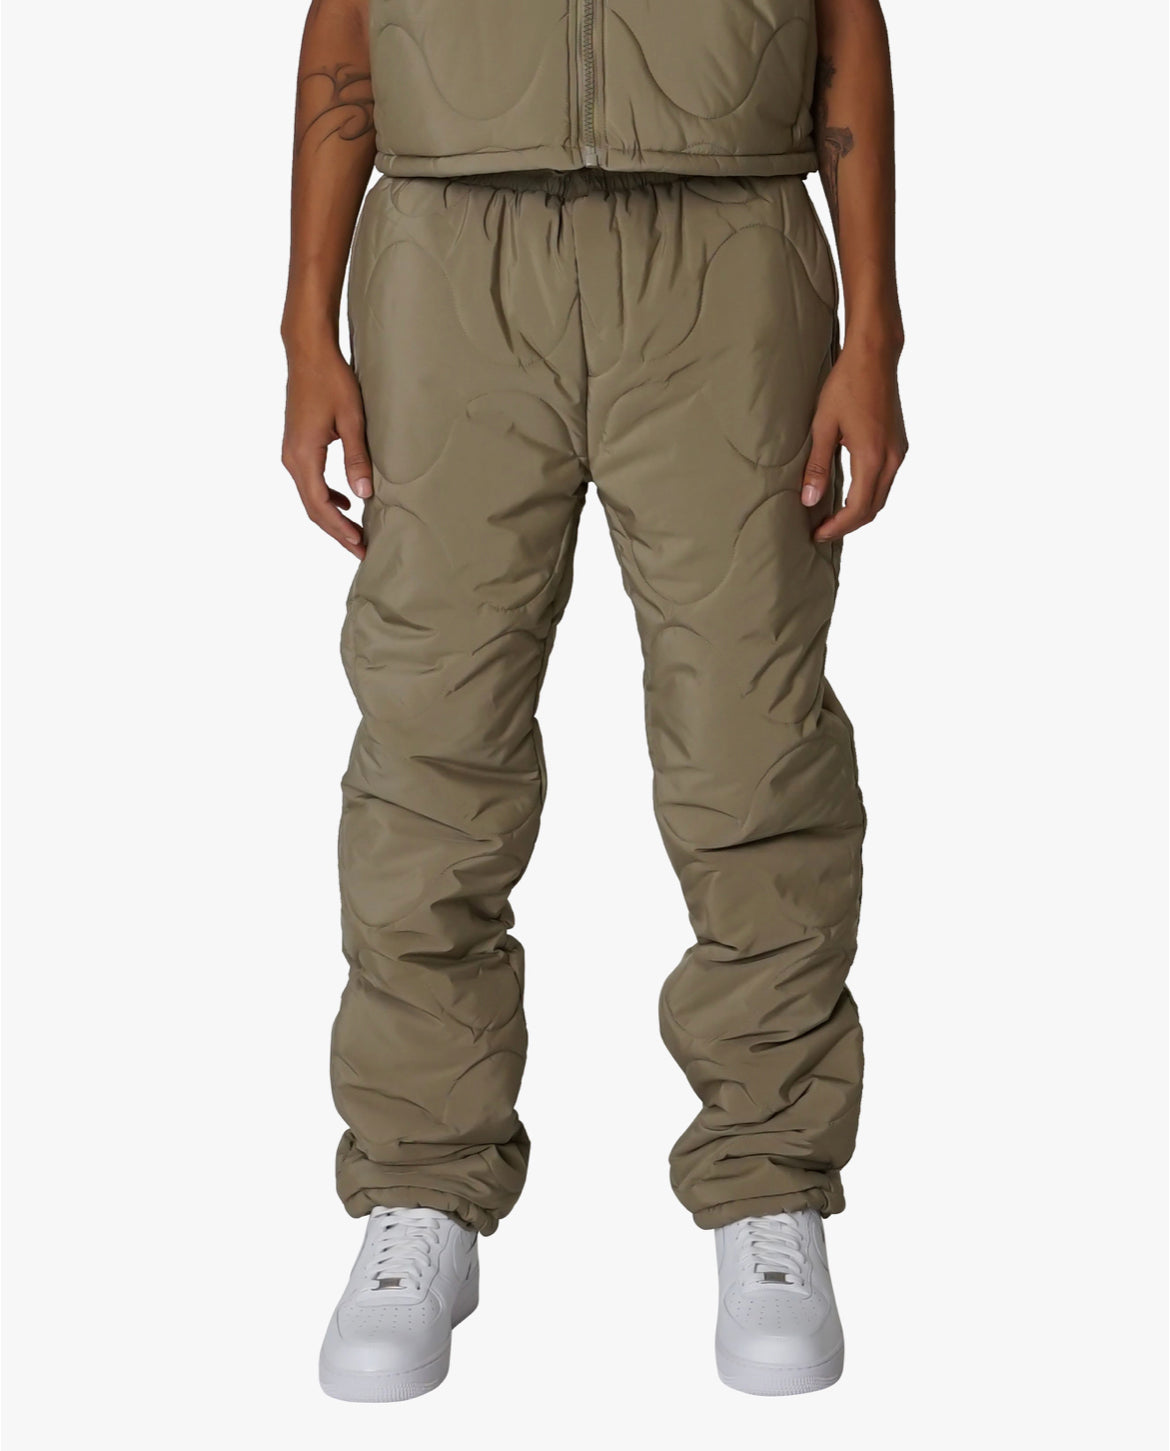 New! Griddy Puffer Pants